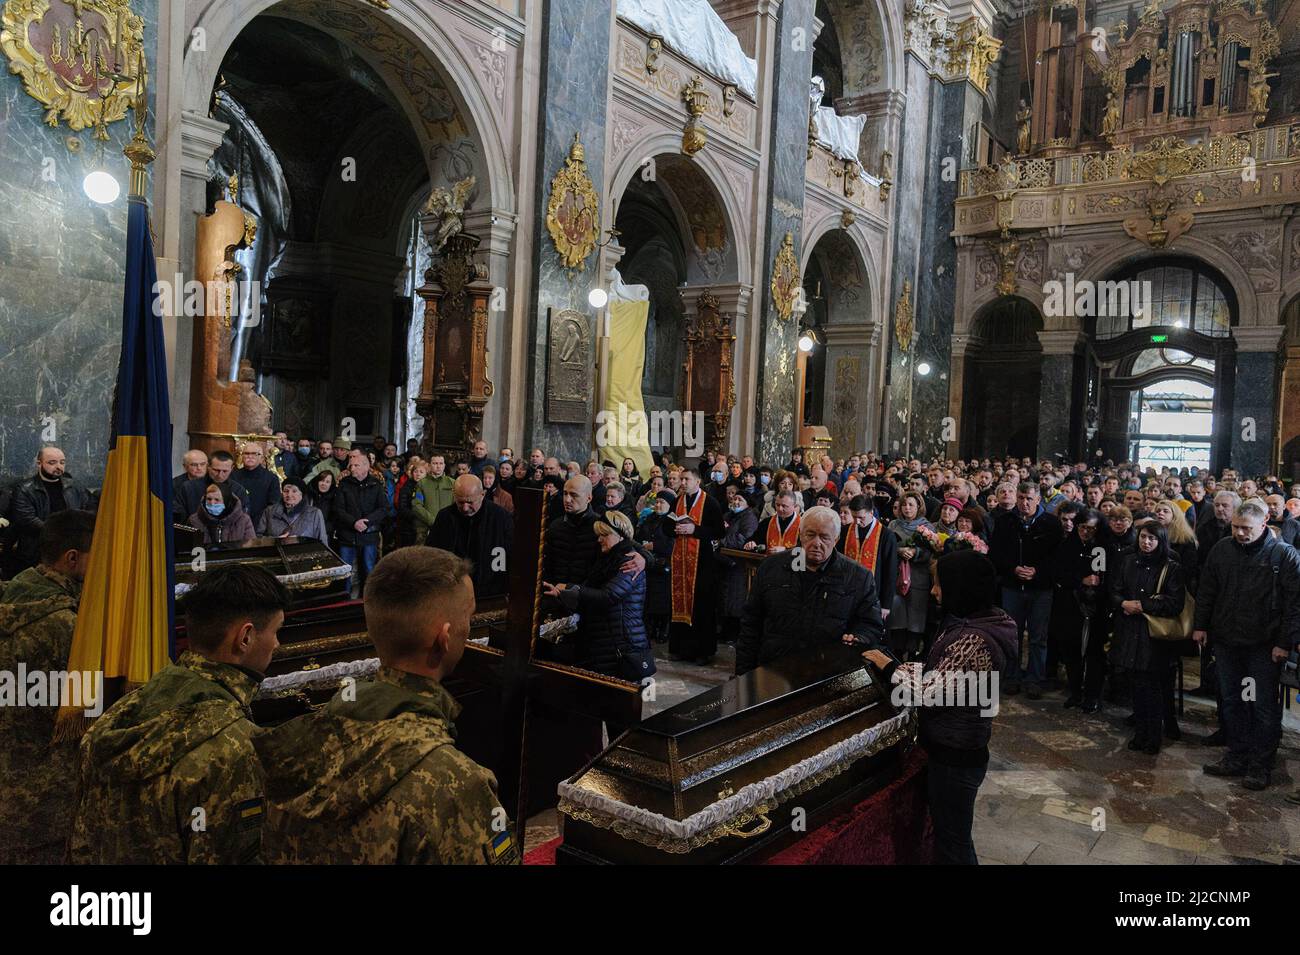 Lviv, Ukraine. 31st Mar, 2022. Ukrainians surround the coffins during the burial. Funeral ceremony of 3 Ukrainian soldiers Kozachenko Andriy, Sarkisyan Ihor, Oliynyk Yuriy killed by Russian forces amid the Russian invasion in Lviv. (Photo by Mykola Tys/SOPA Images/Sipa USA) Credit: Sipa USA/Alamy Live News Stock Photo